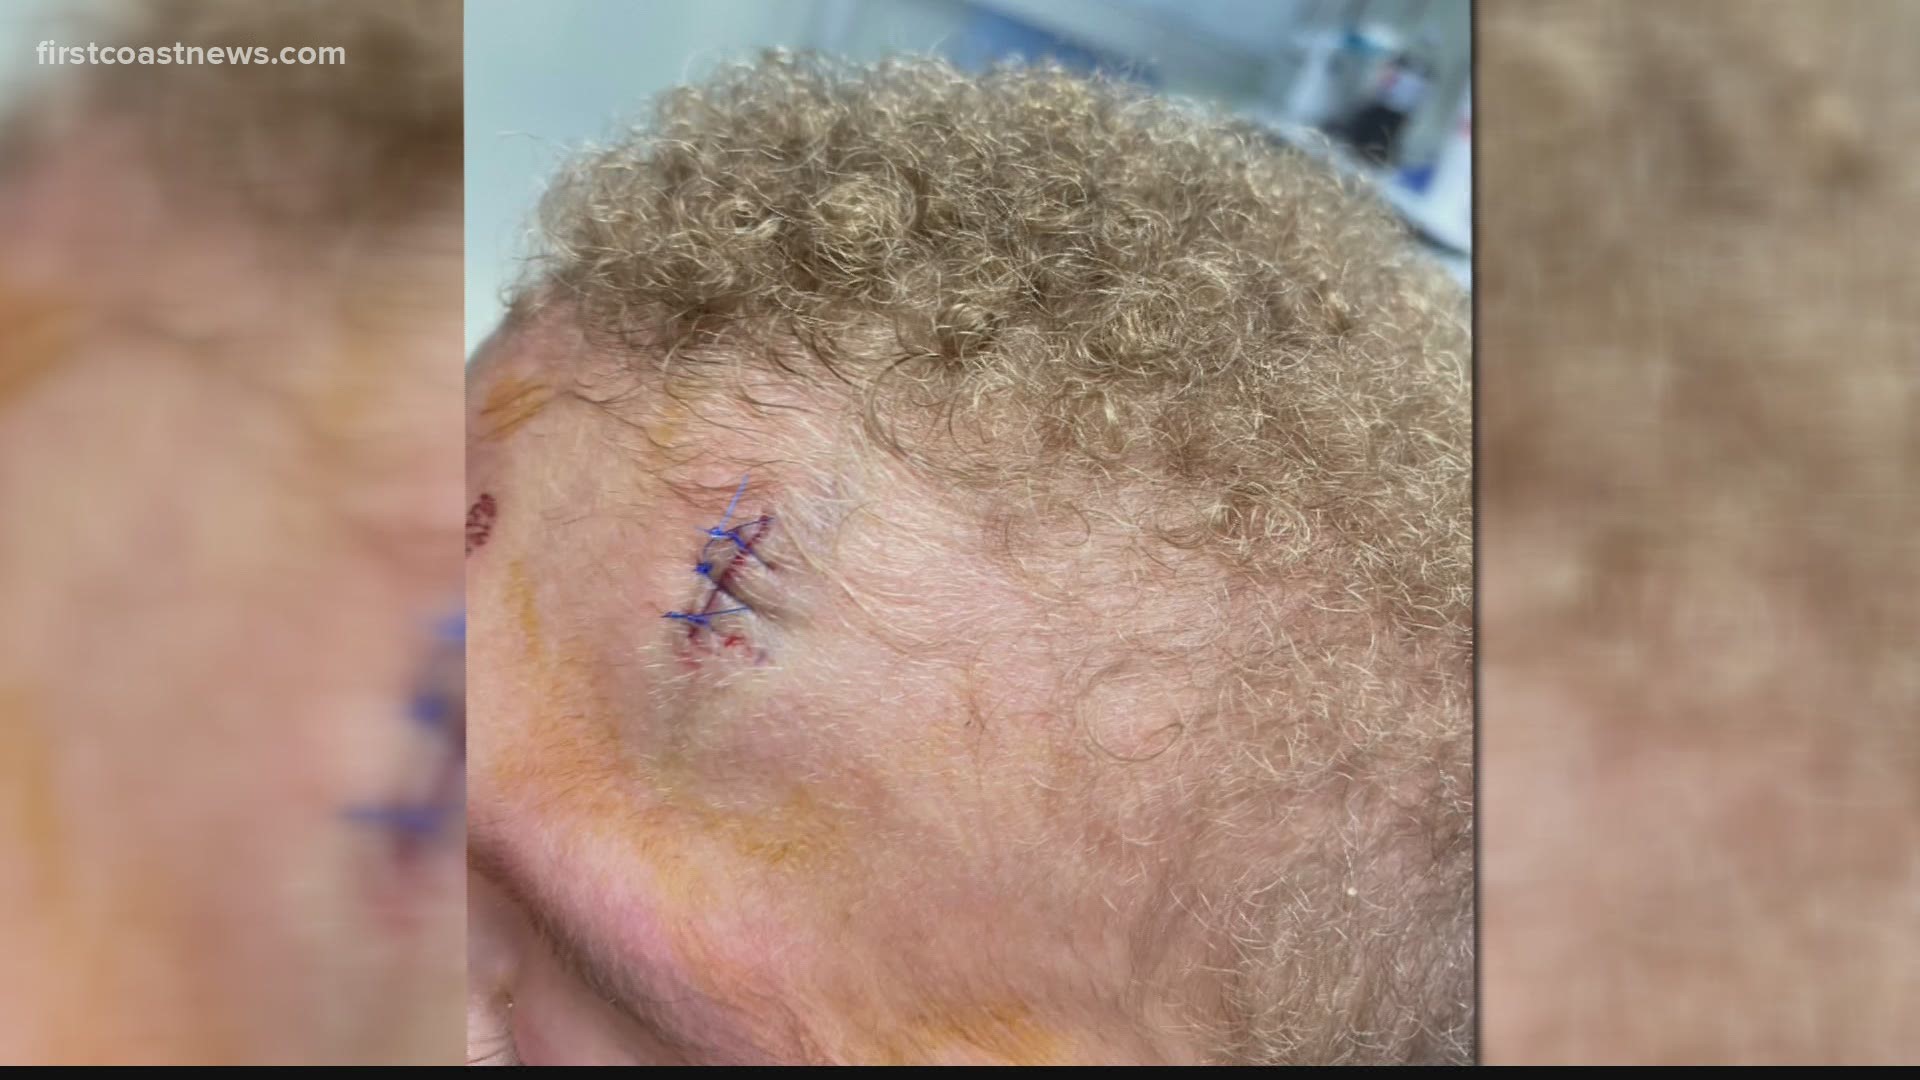 Sara Hastings says her 5-year-old son was pushed by another student Tuesday afternoon, leaving him with deep cuts to his forehead.